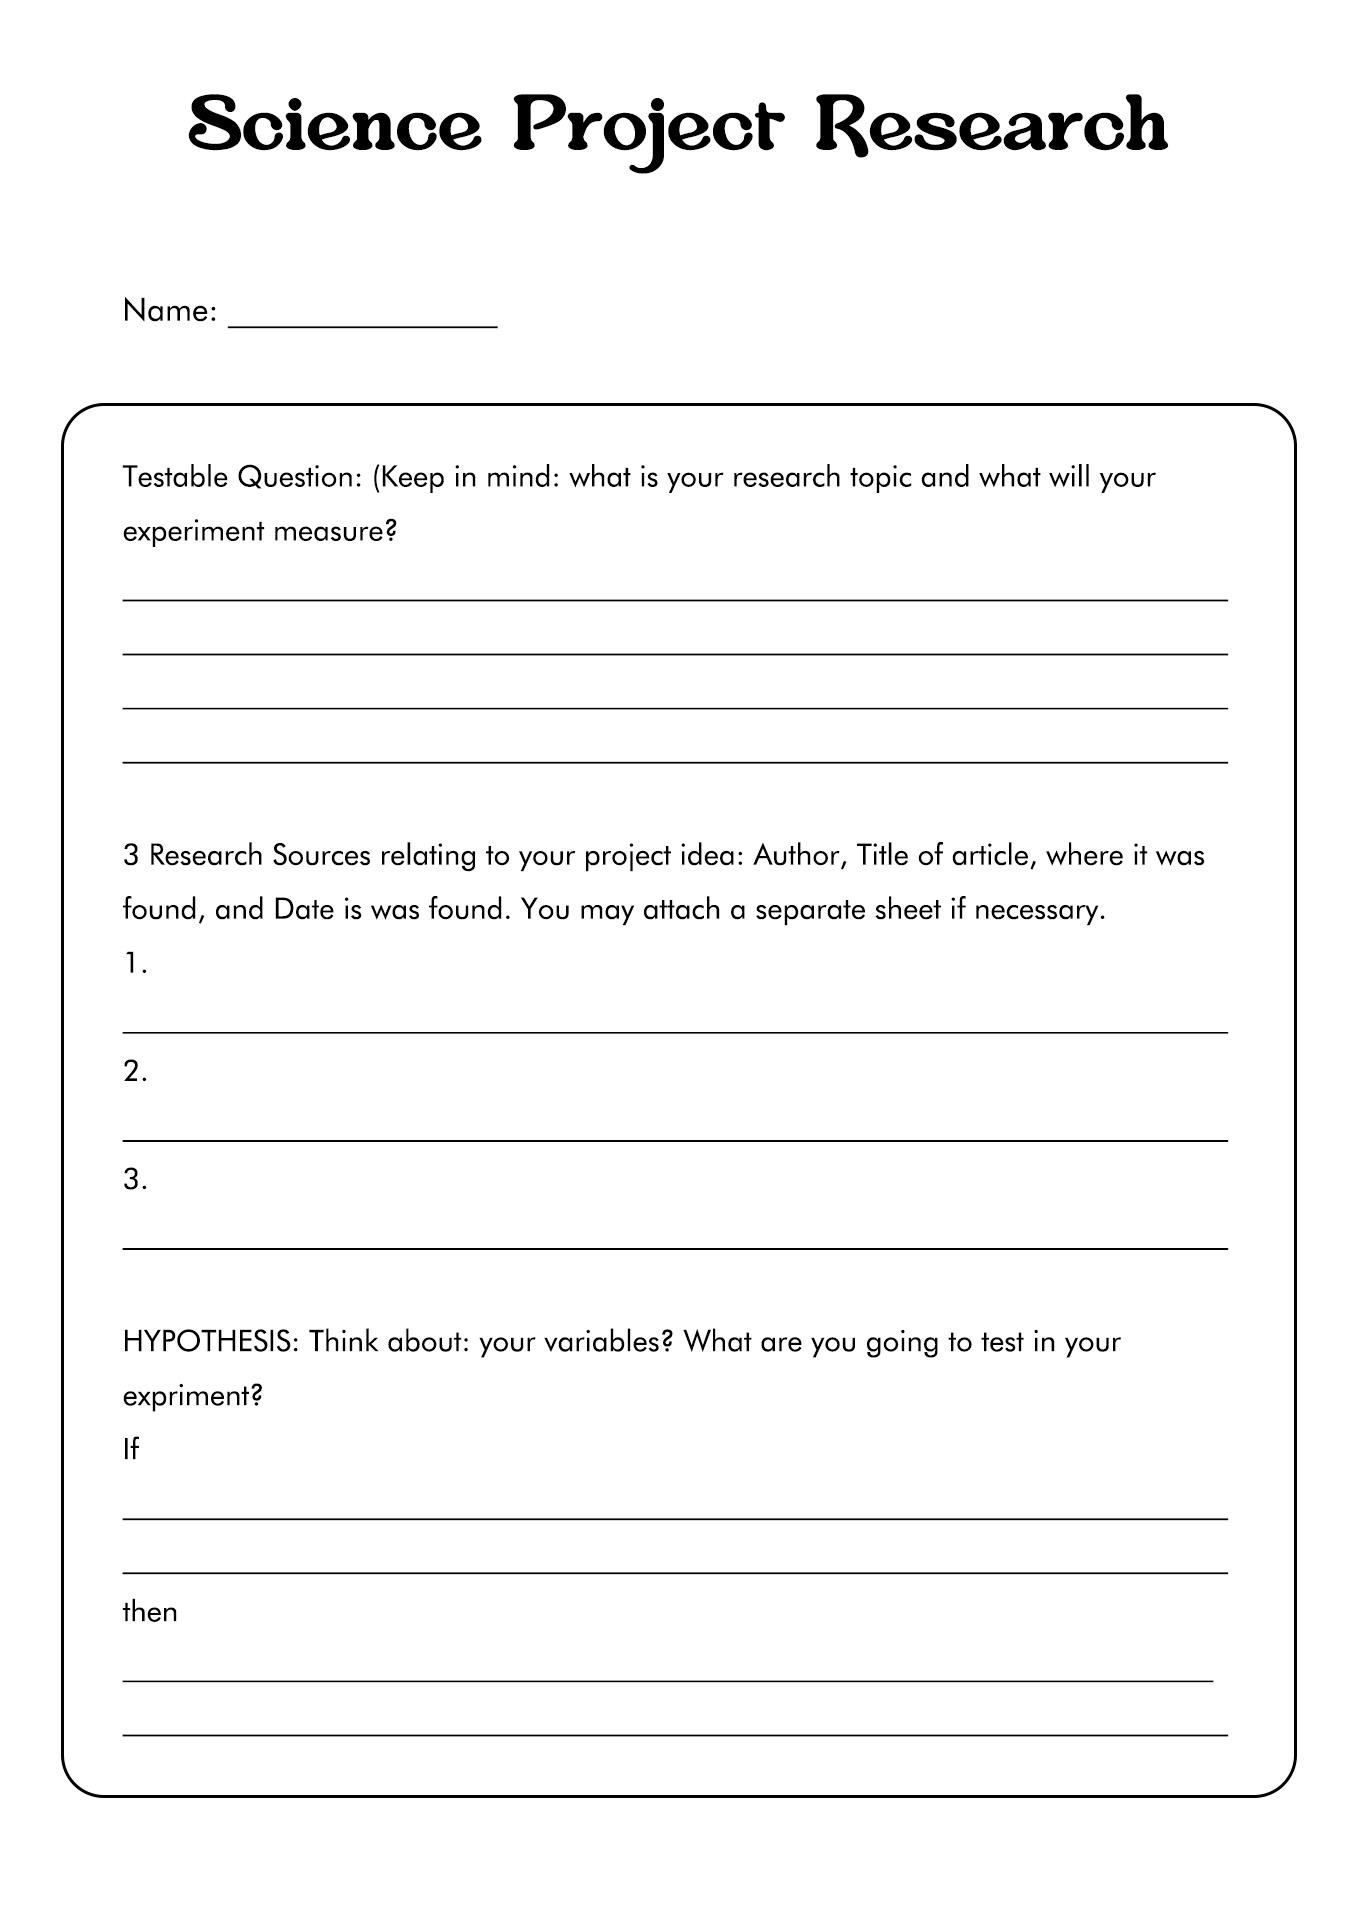 Science Project Research Plan Worksheet